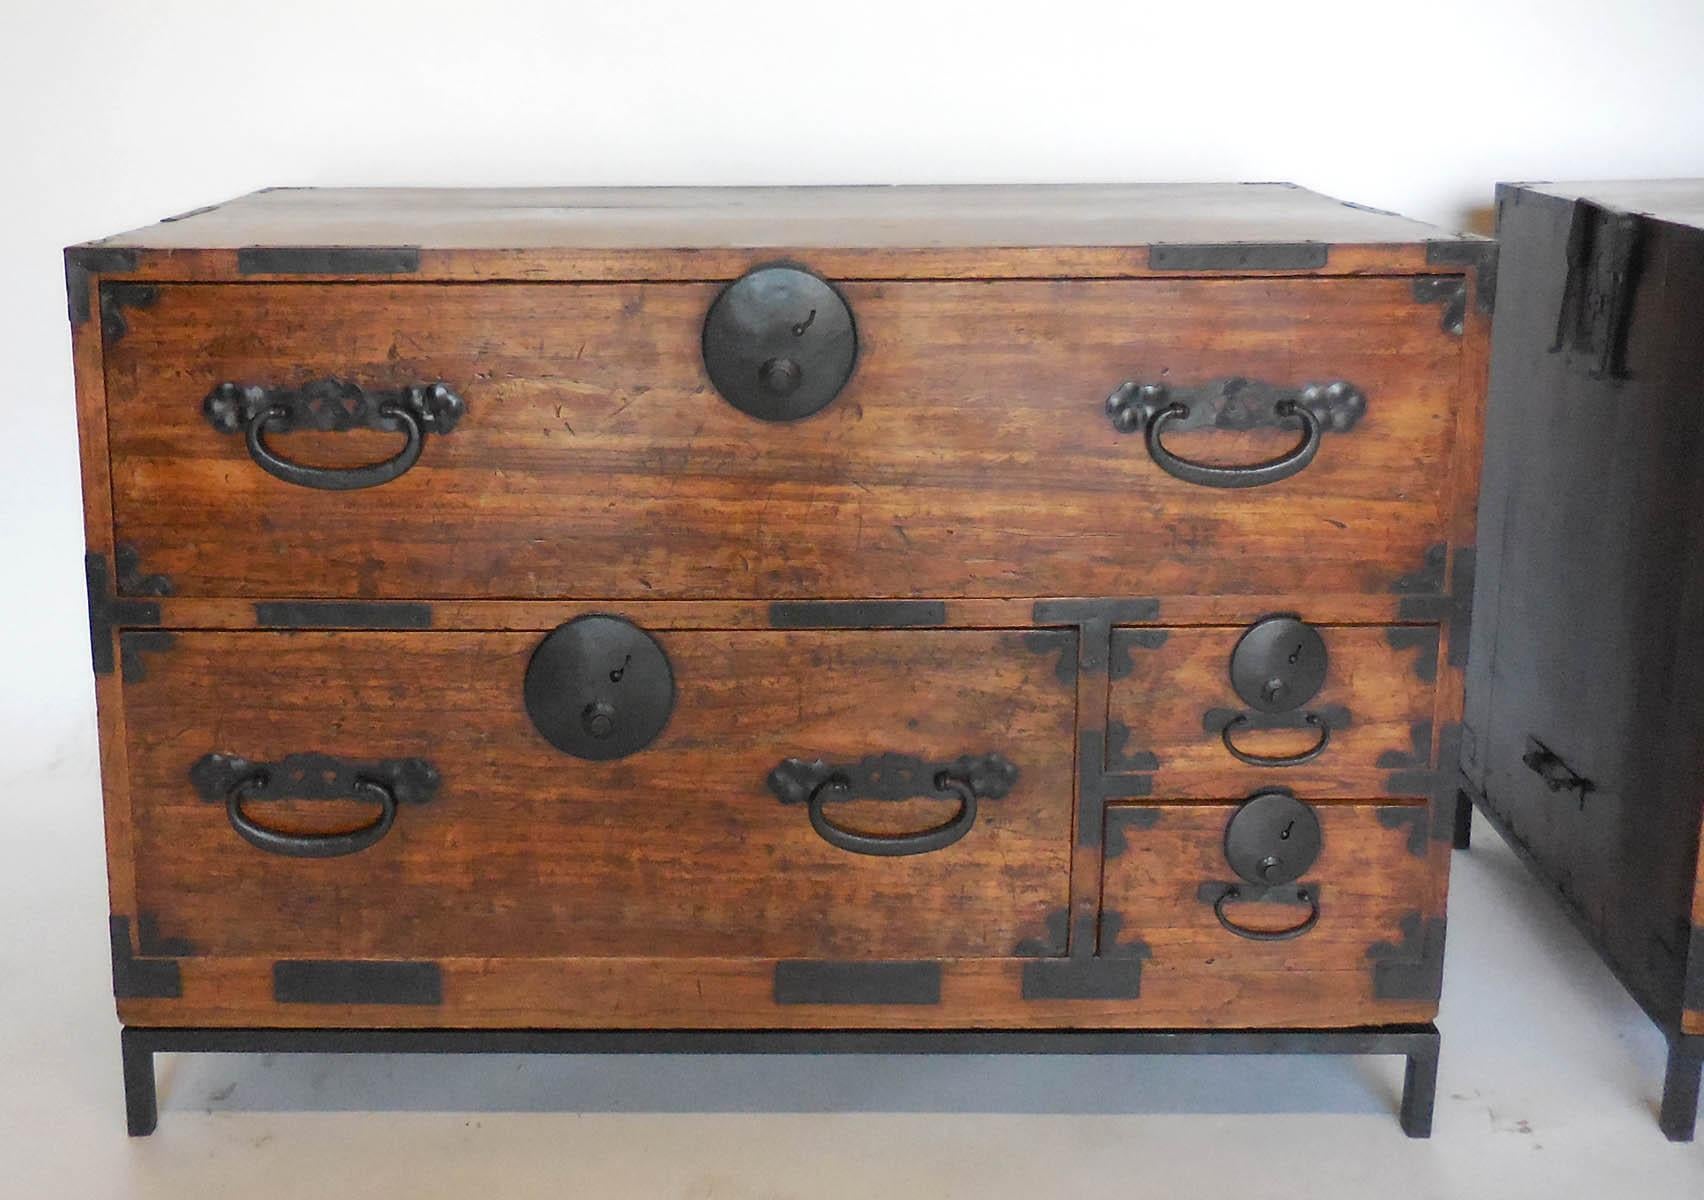 Pair of 19th century Japanese tansus on custom iron bases. Sold as a pair. All original hardware, bamboo nail. Functional drawers and door. Beautiful patina. Very functional as nightstands. In very good condition.